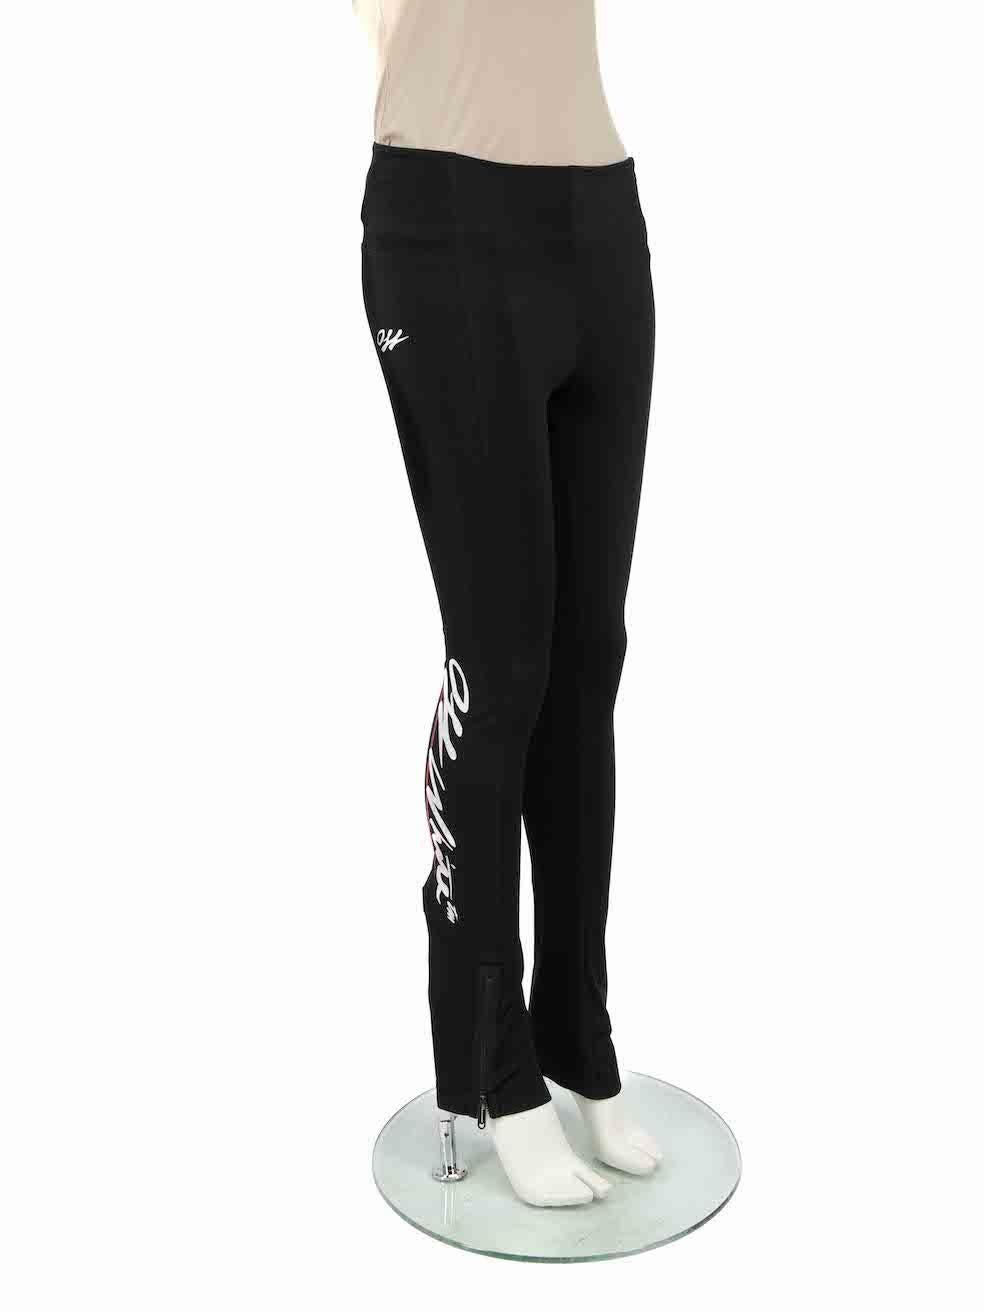 CONDITION is Very good. Hardly any visible wear to leggings is evident on this used Off-White designer resale item.
 
 Details
 
 
 Black
 
 Cotton
 
 Leggings
 
 Stretchy
 
 Logo printed
 
 Zipped cuffs
 
 Figure hugging fit
 
 
 
 
 
 Made in